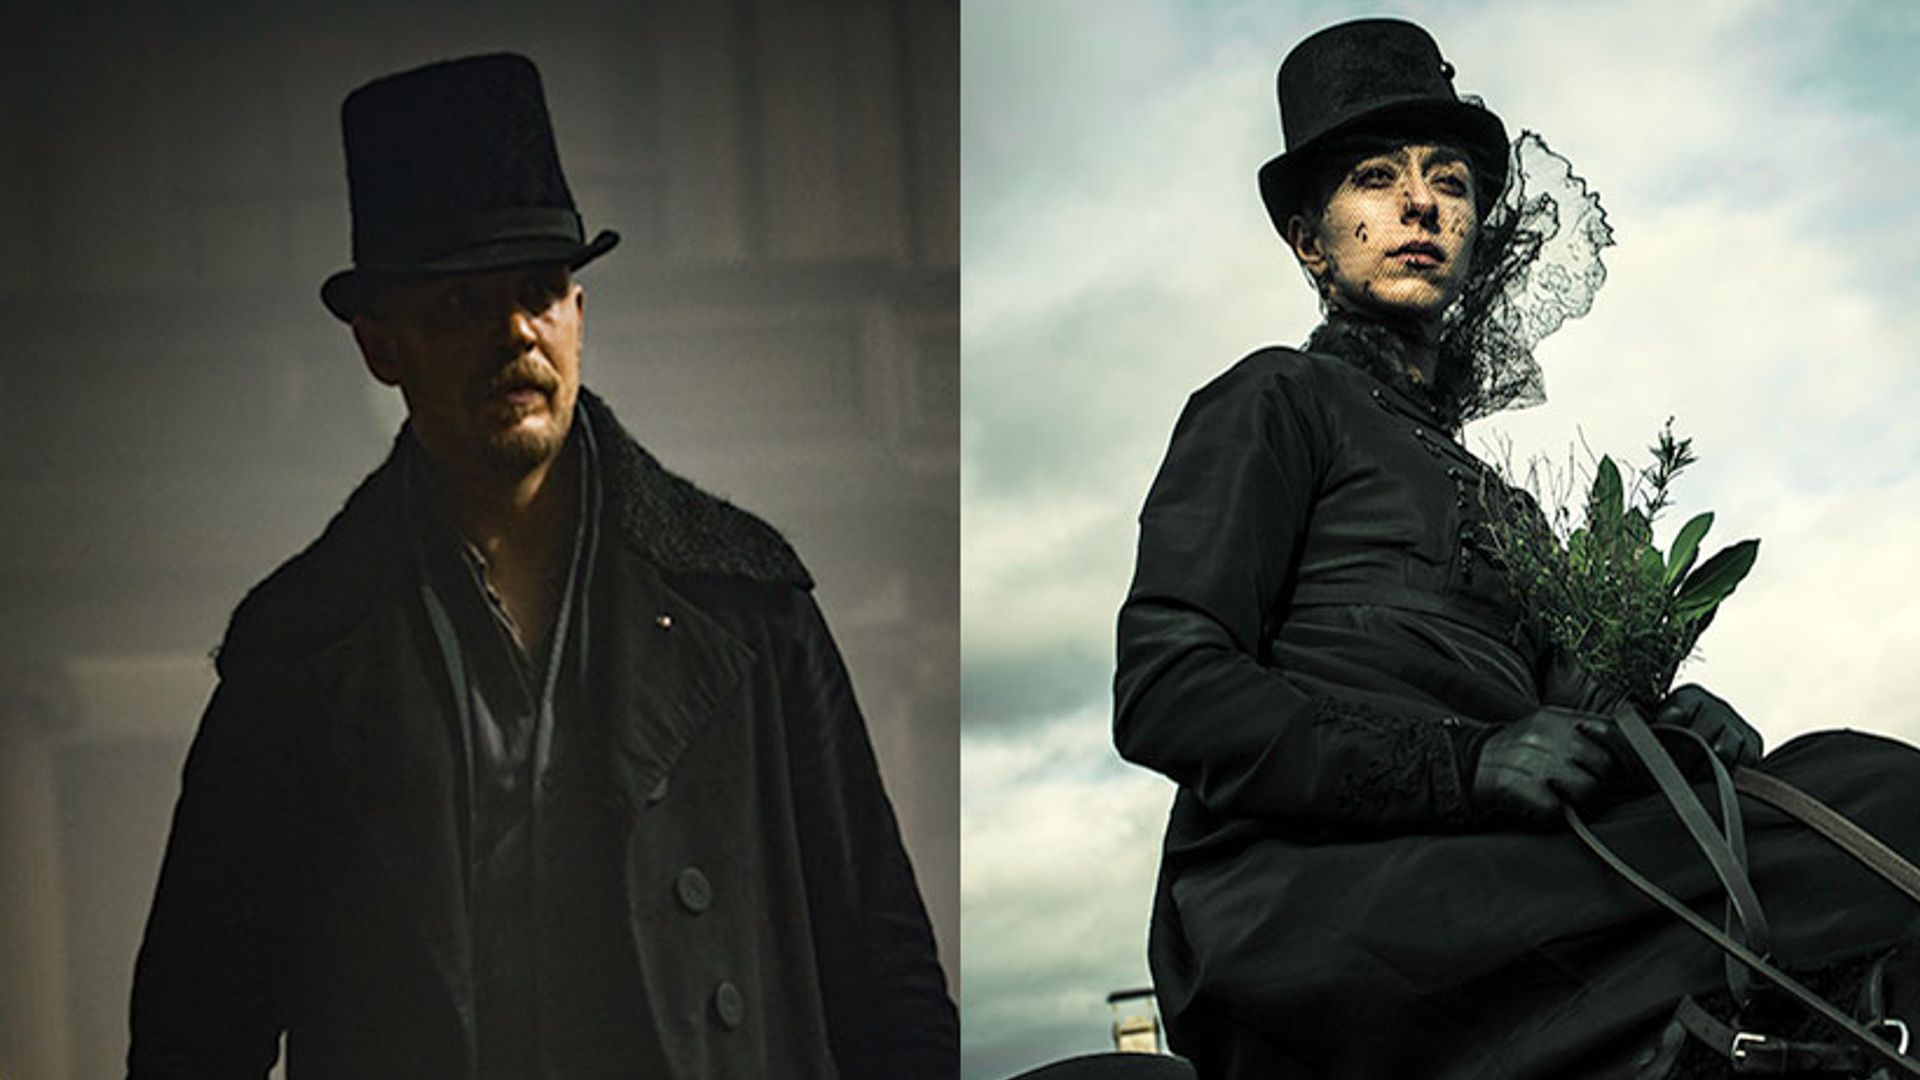 The man behind 'Peaky Blinders' and 'Taboo' is creating an epic